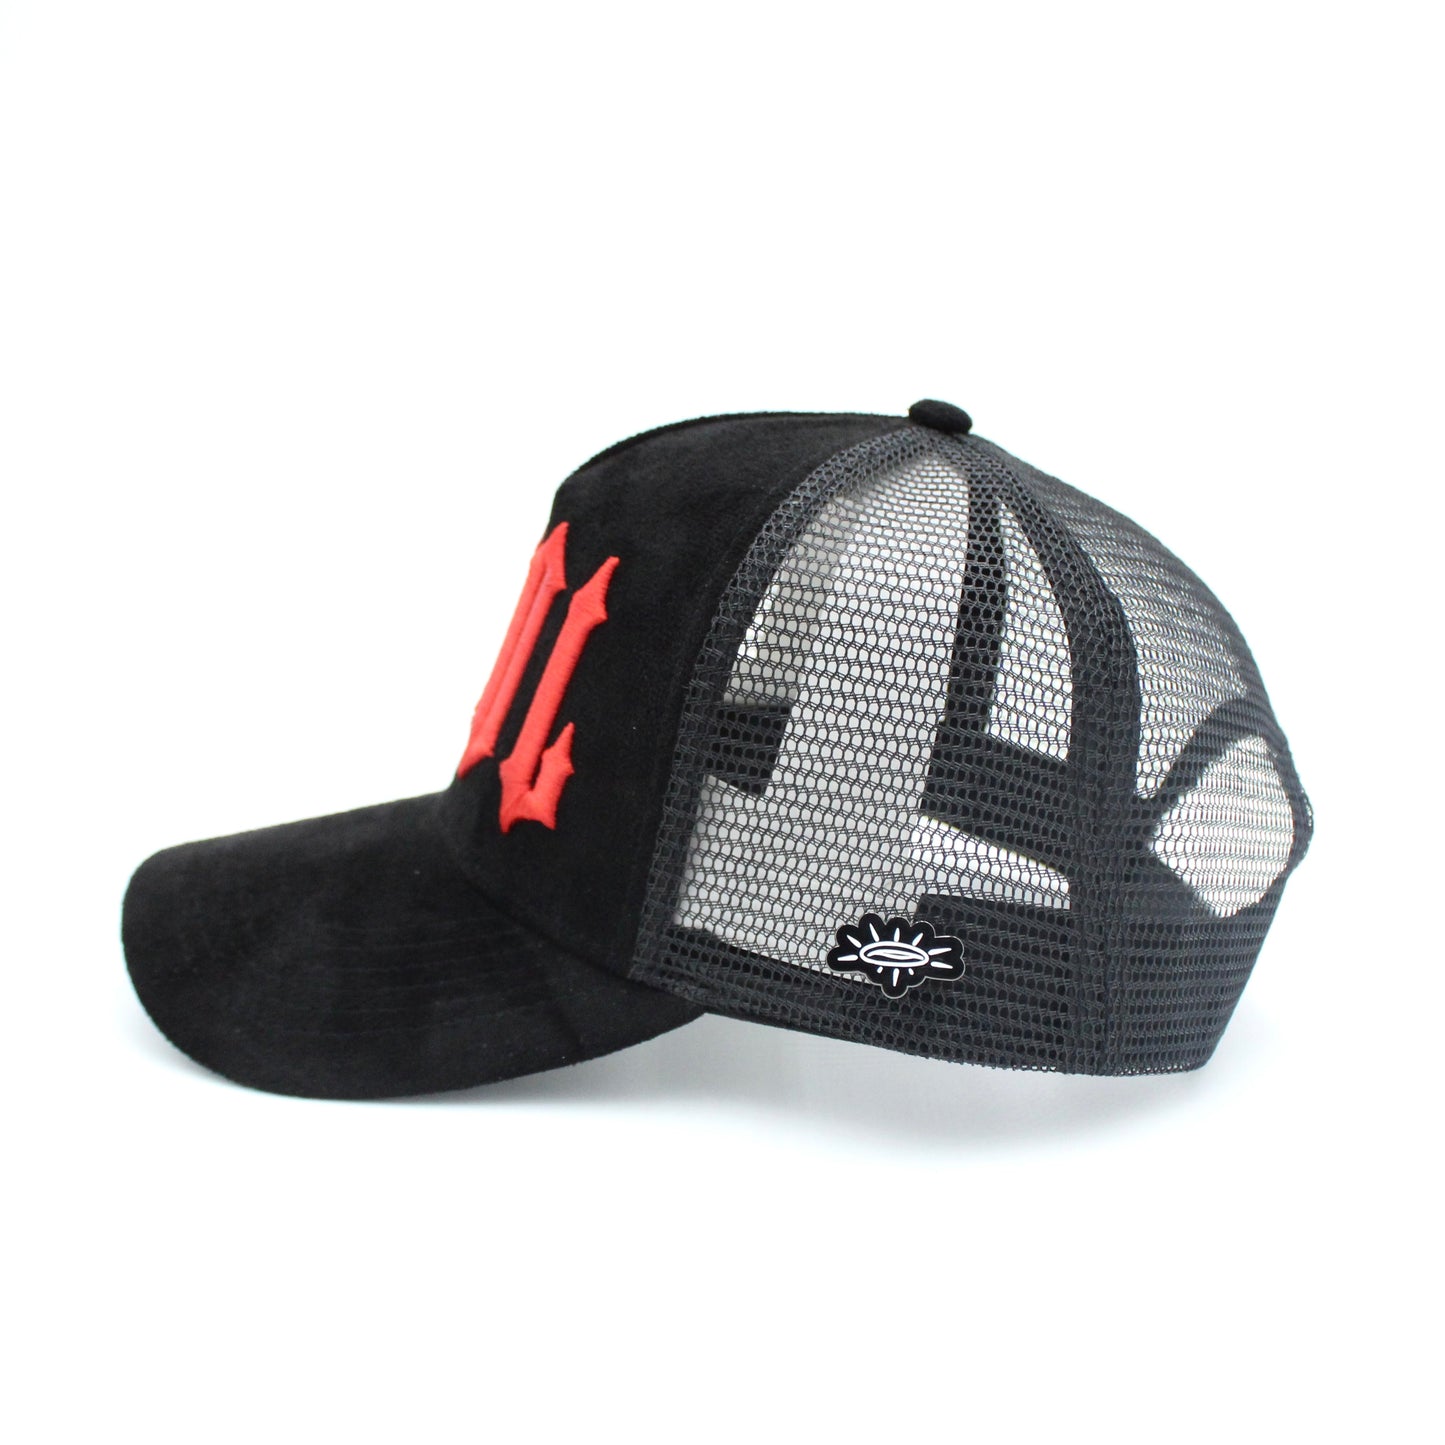 EVOL New Font Trucker Hat Black/Red (Suede Edition)